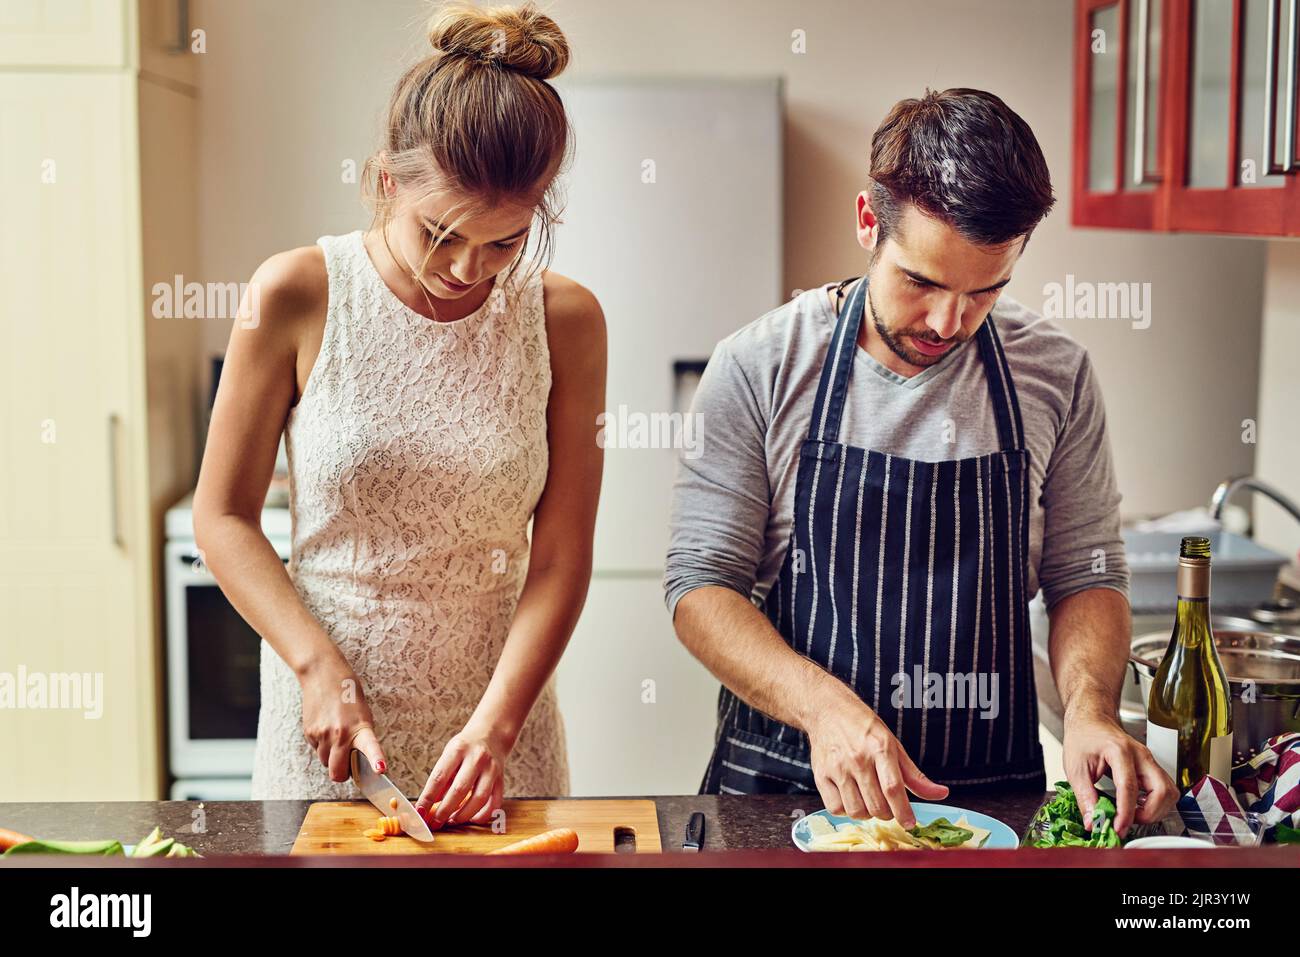 Cooking with love provides food for the soul. a young couple preparing food together at home. Stock Photo